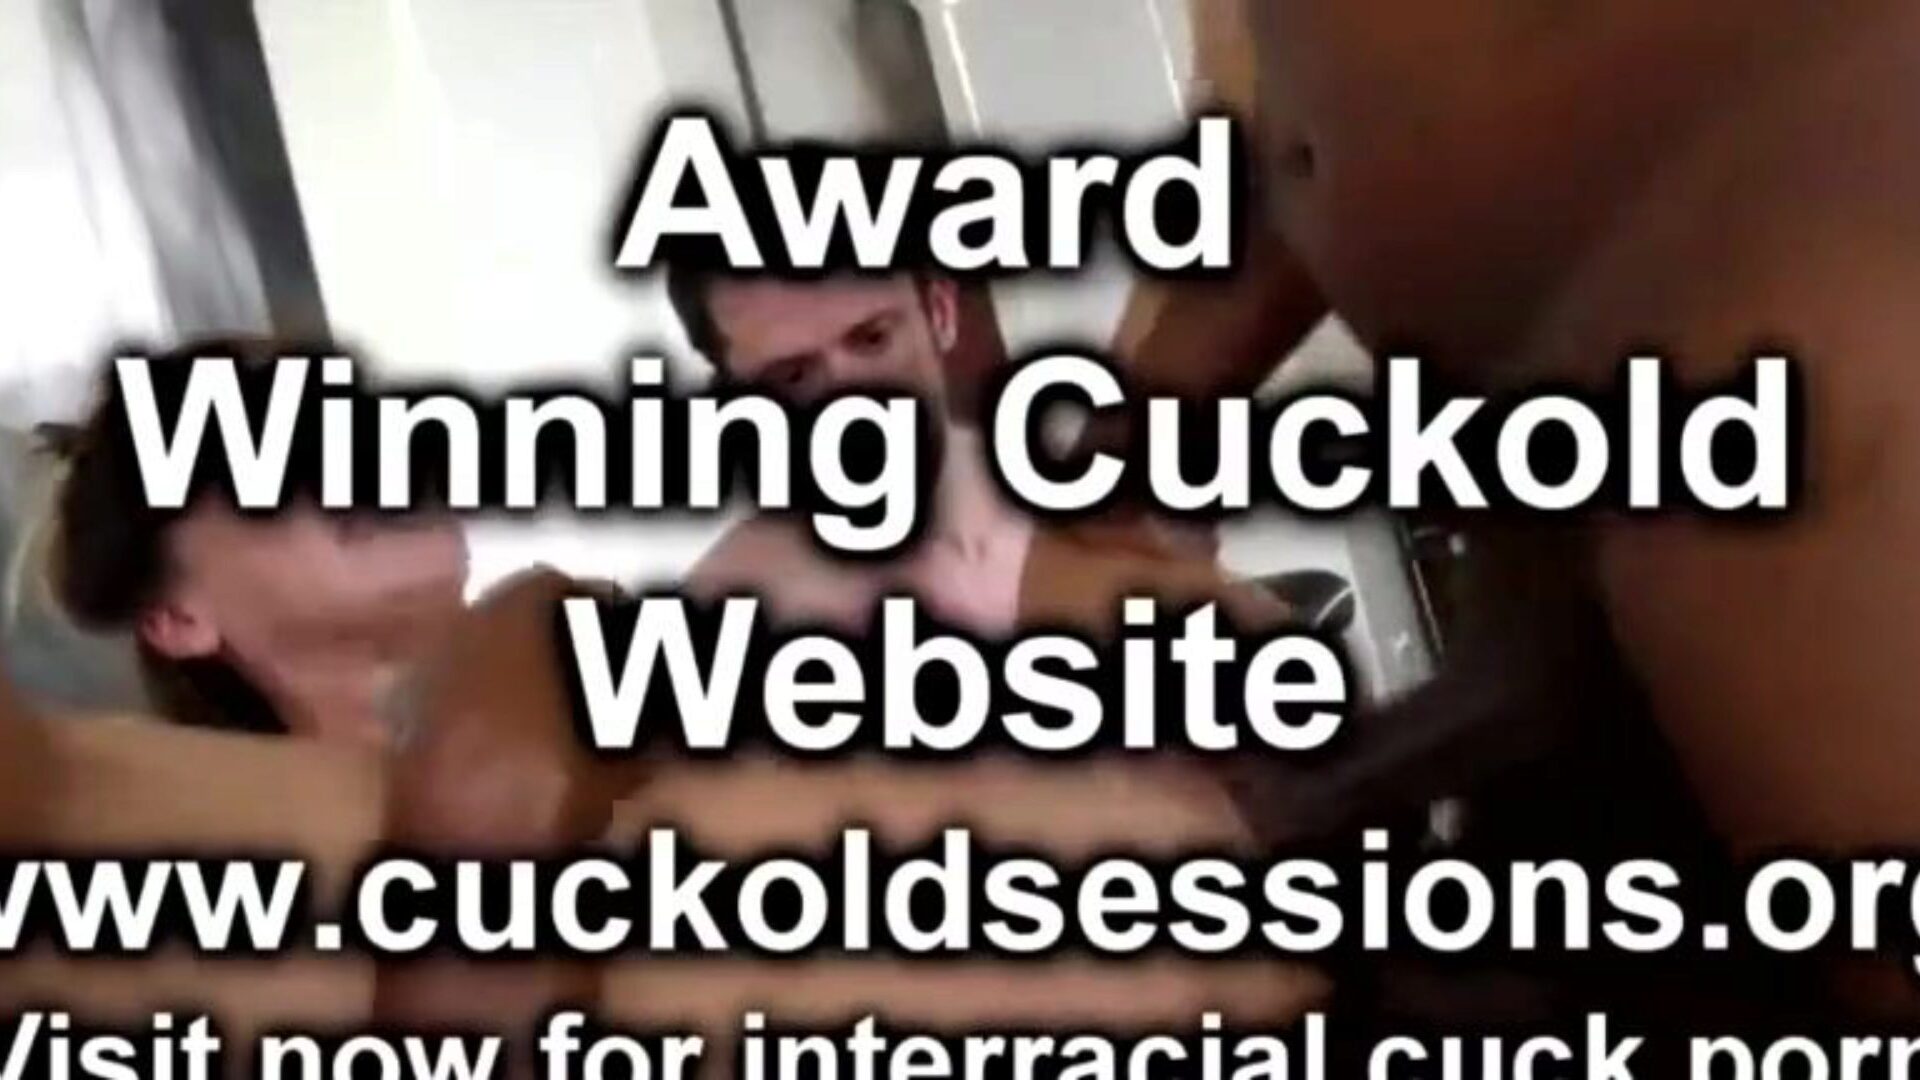 Ebony stud inpregnates my wife cuckold | XTube Porn Episode from cuckoldsessions13 See African guy inpregnates my wifey cheating on Xtube, the world's superlatively precious pornography tube with the hottest selection of porn videos and homosexual XXX movies